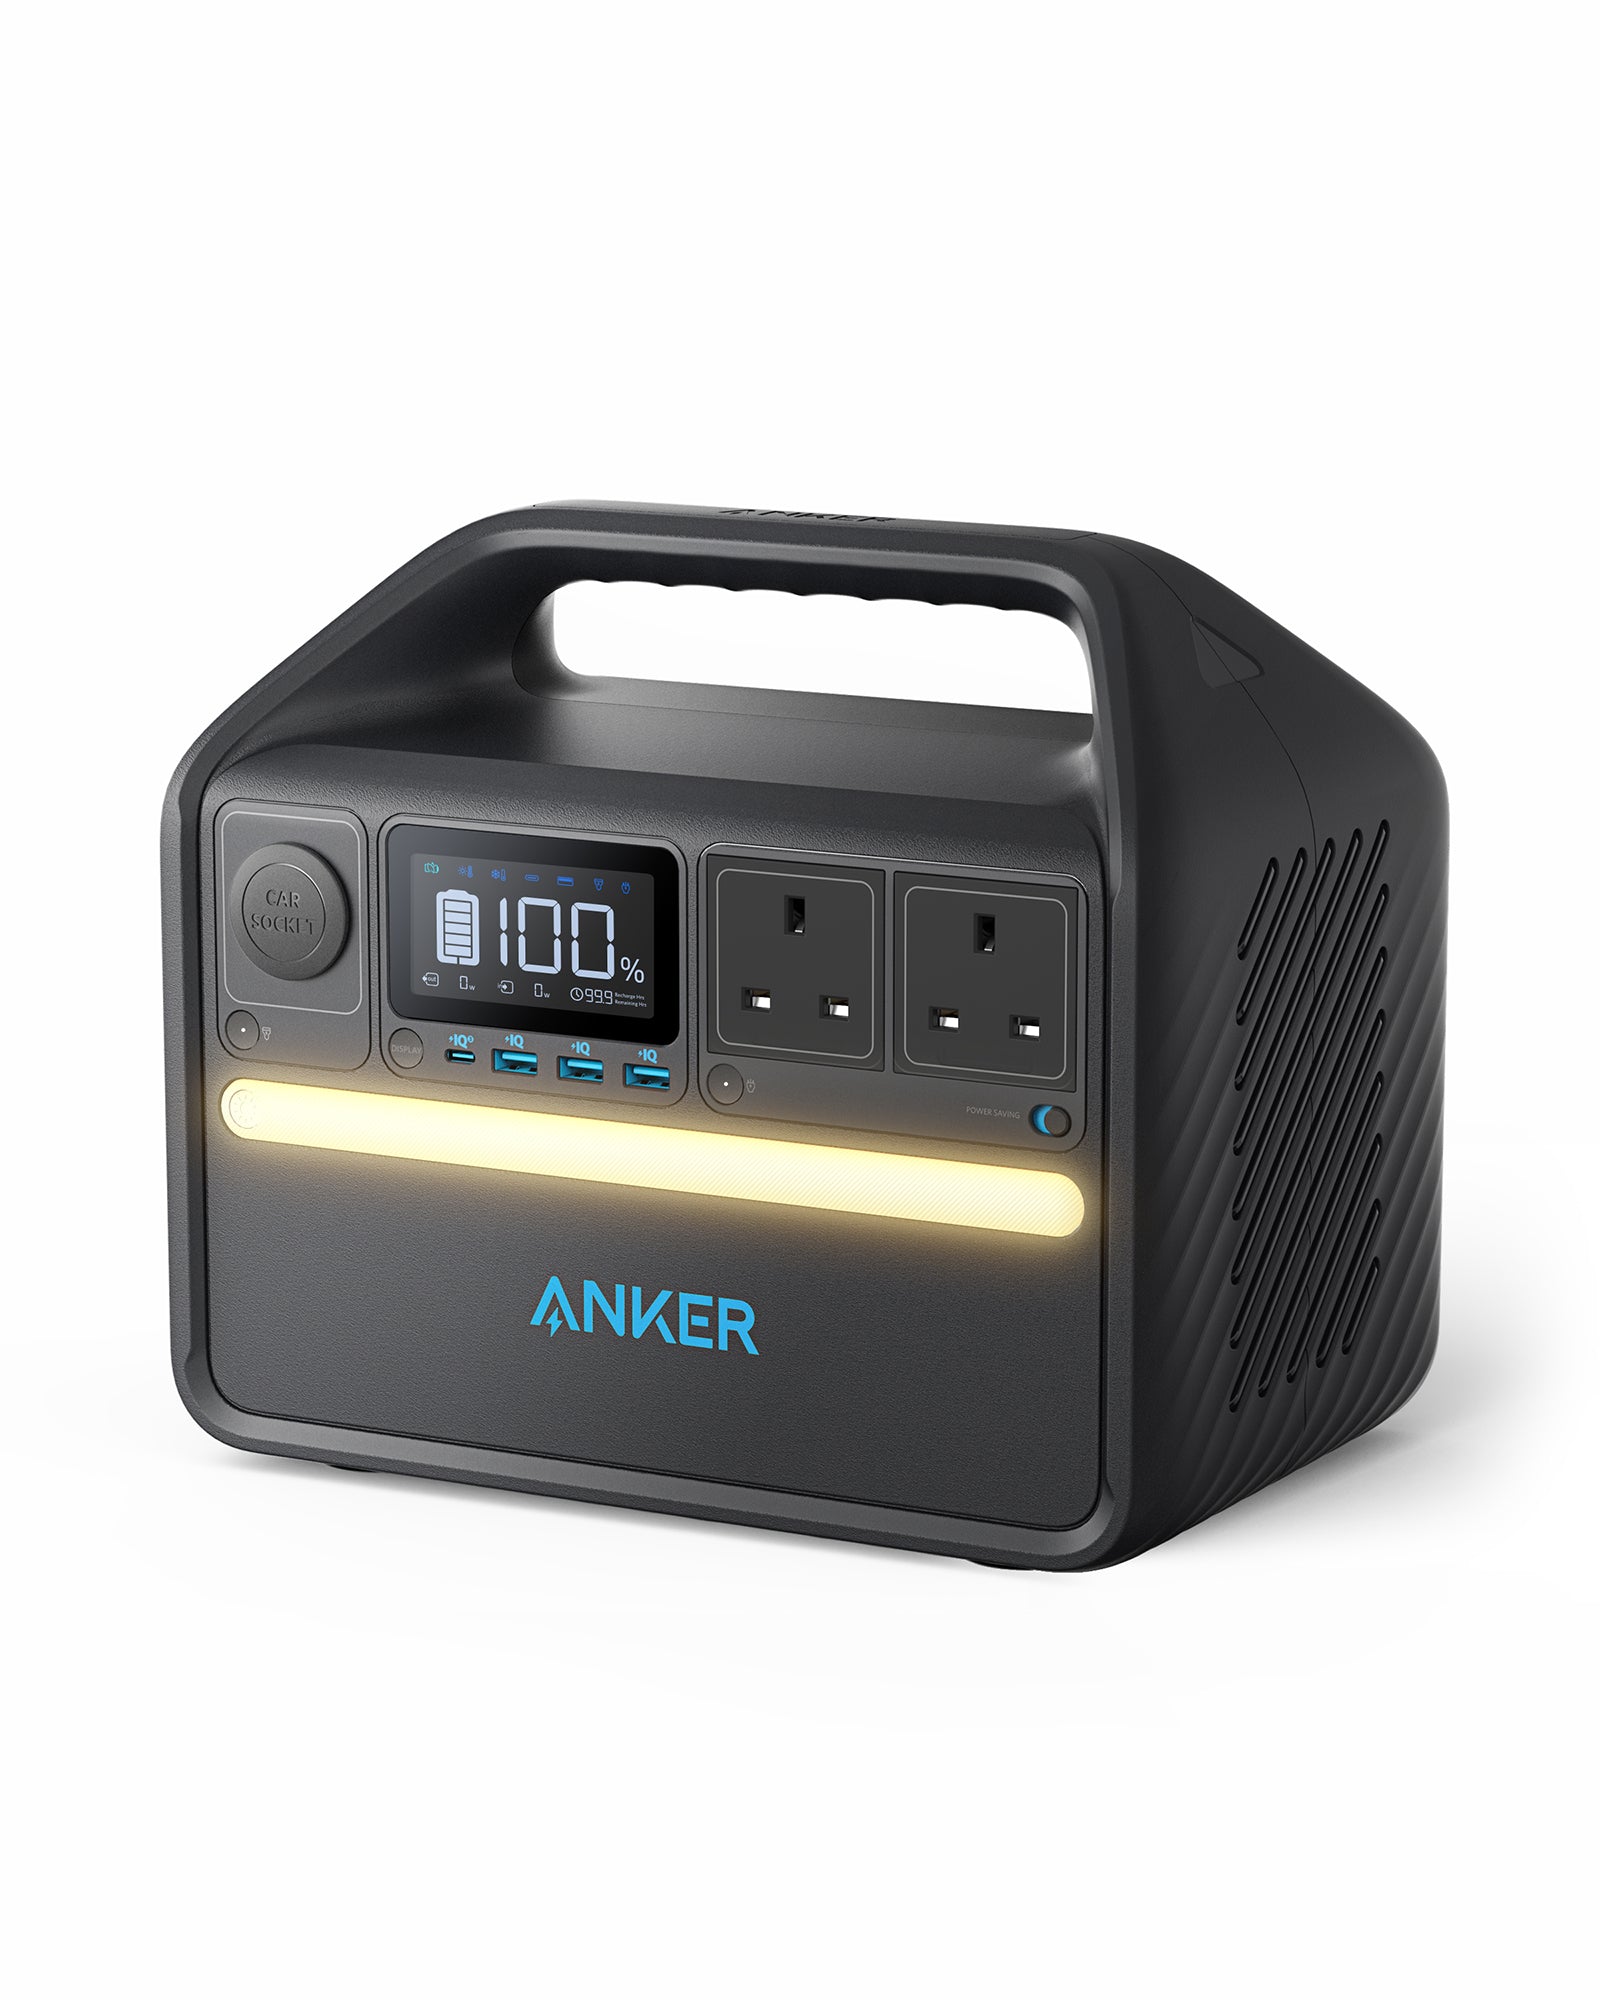 Anker 535 Portable Power Station, Portable Generator 512Wh (PowerHouse 512Wh), 500W 9 - Port Outdoor Generator with 4 AC Outlets, 60W USB - C PD Output, LED Light for Camping, RV, Emergencies, and More